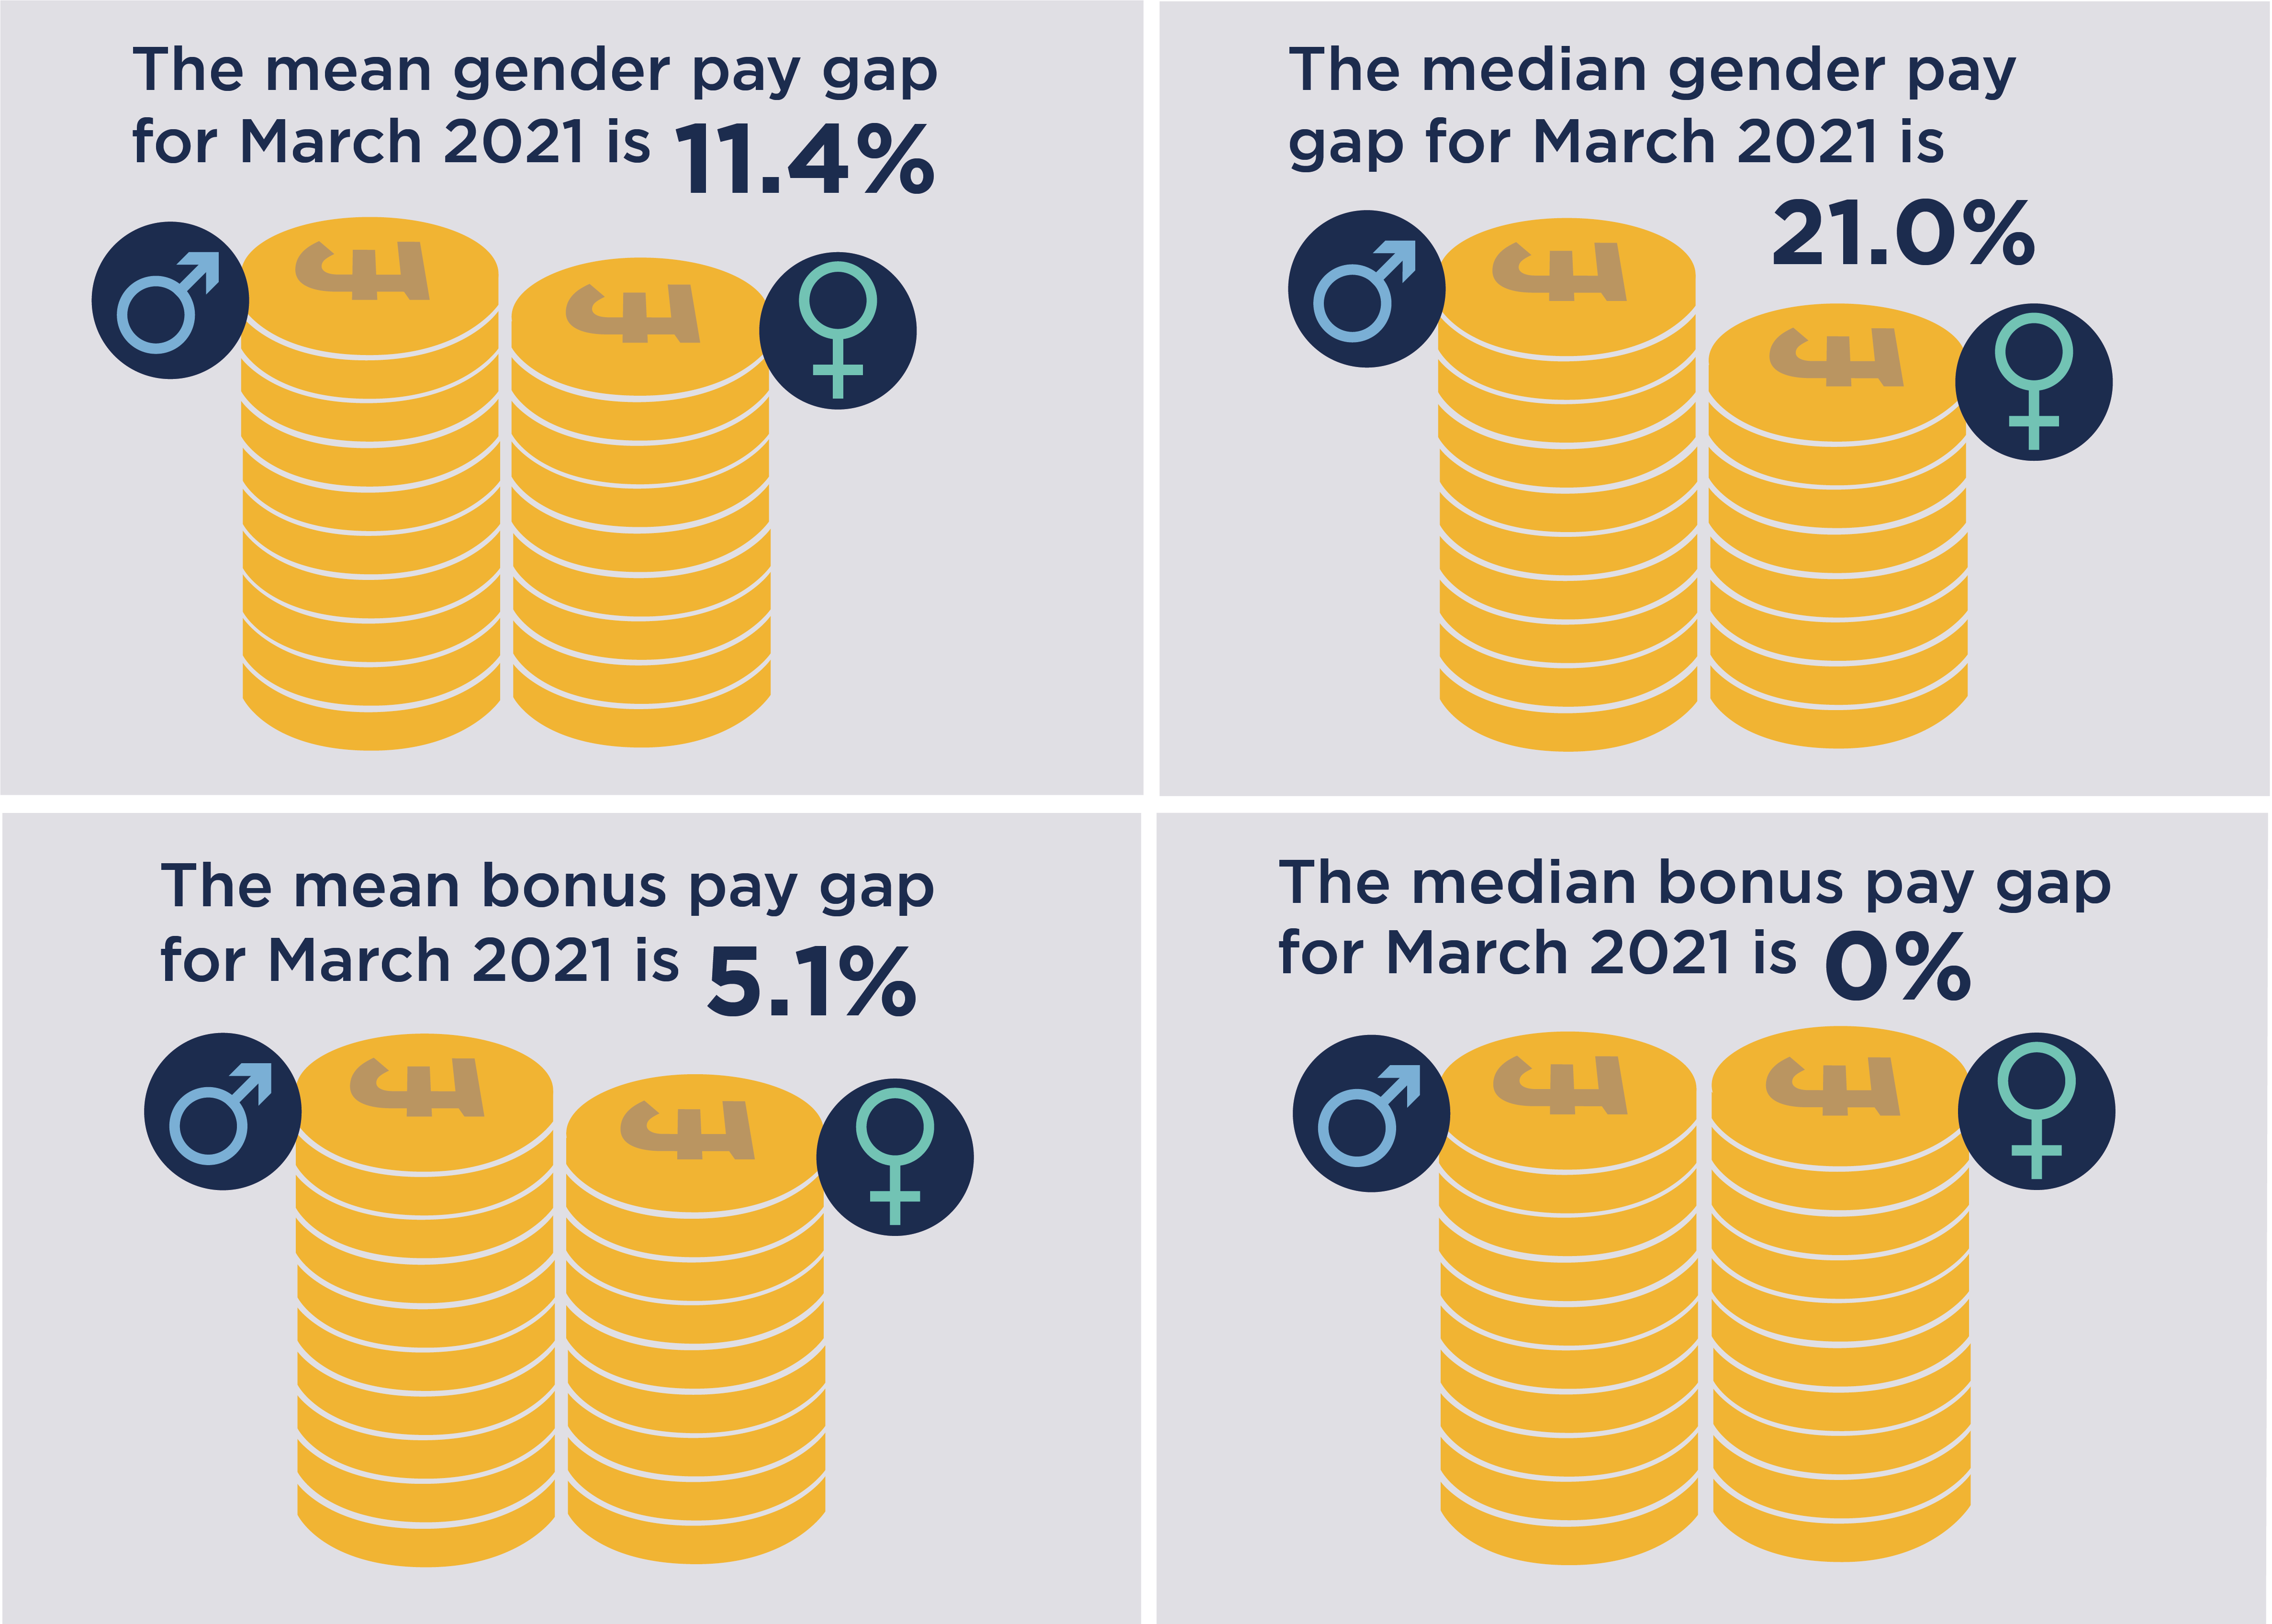 mean gender pay gap and mean bonus pay gap for March 2021 - 4 charts